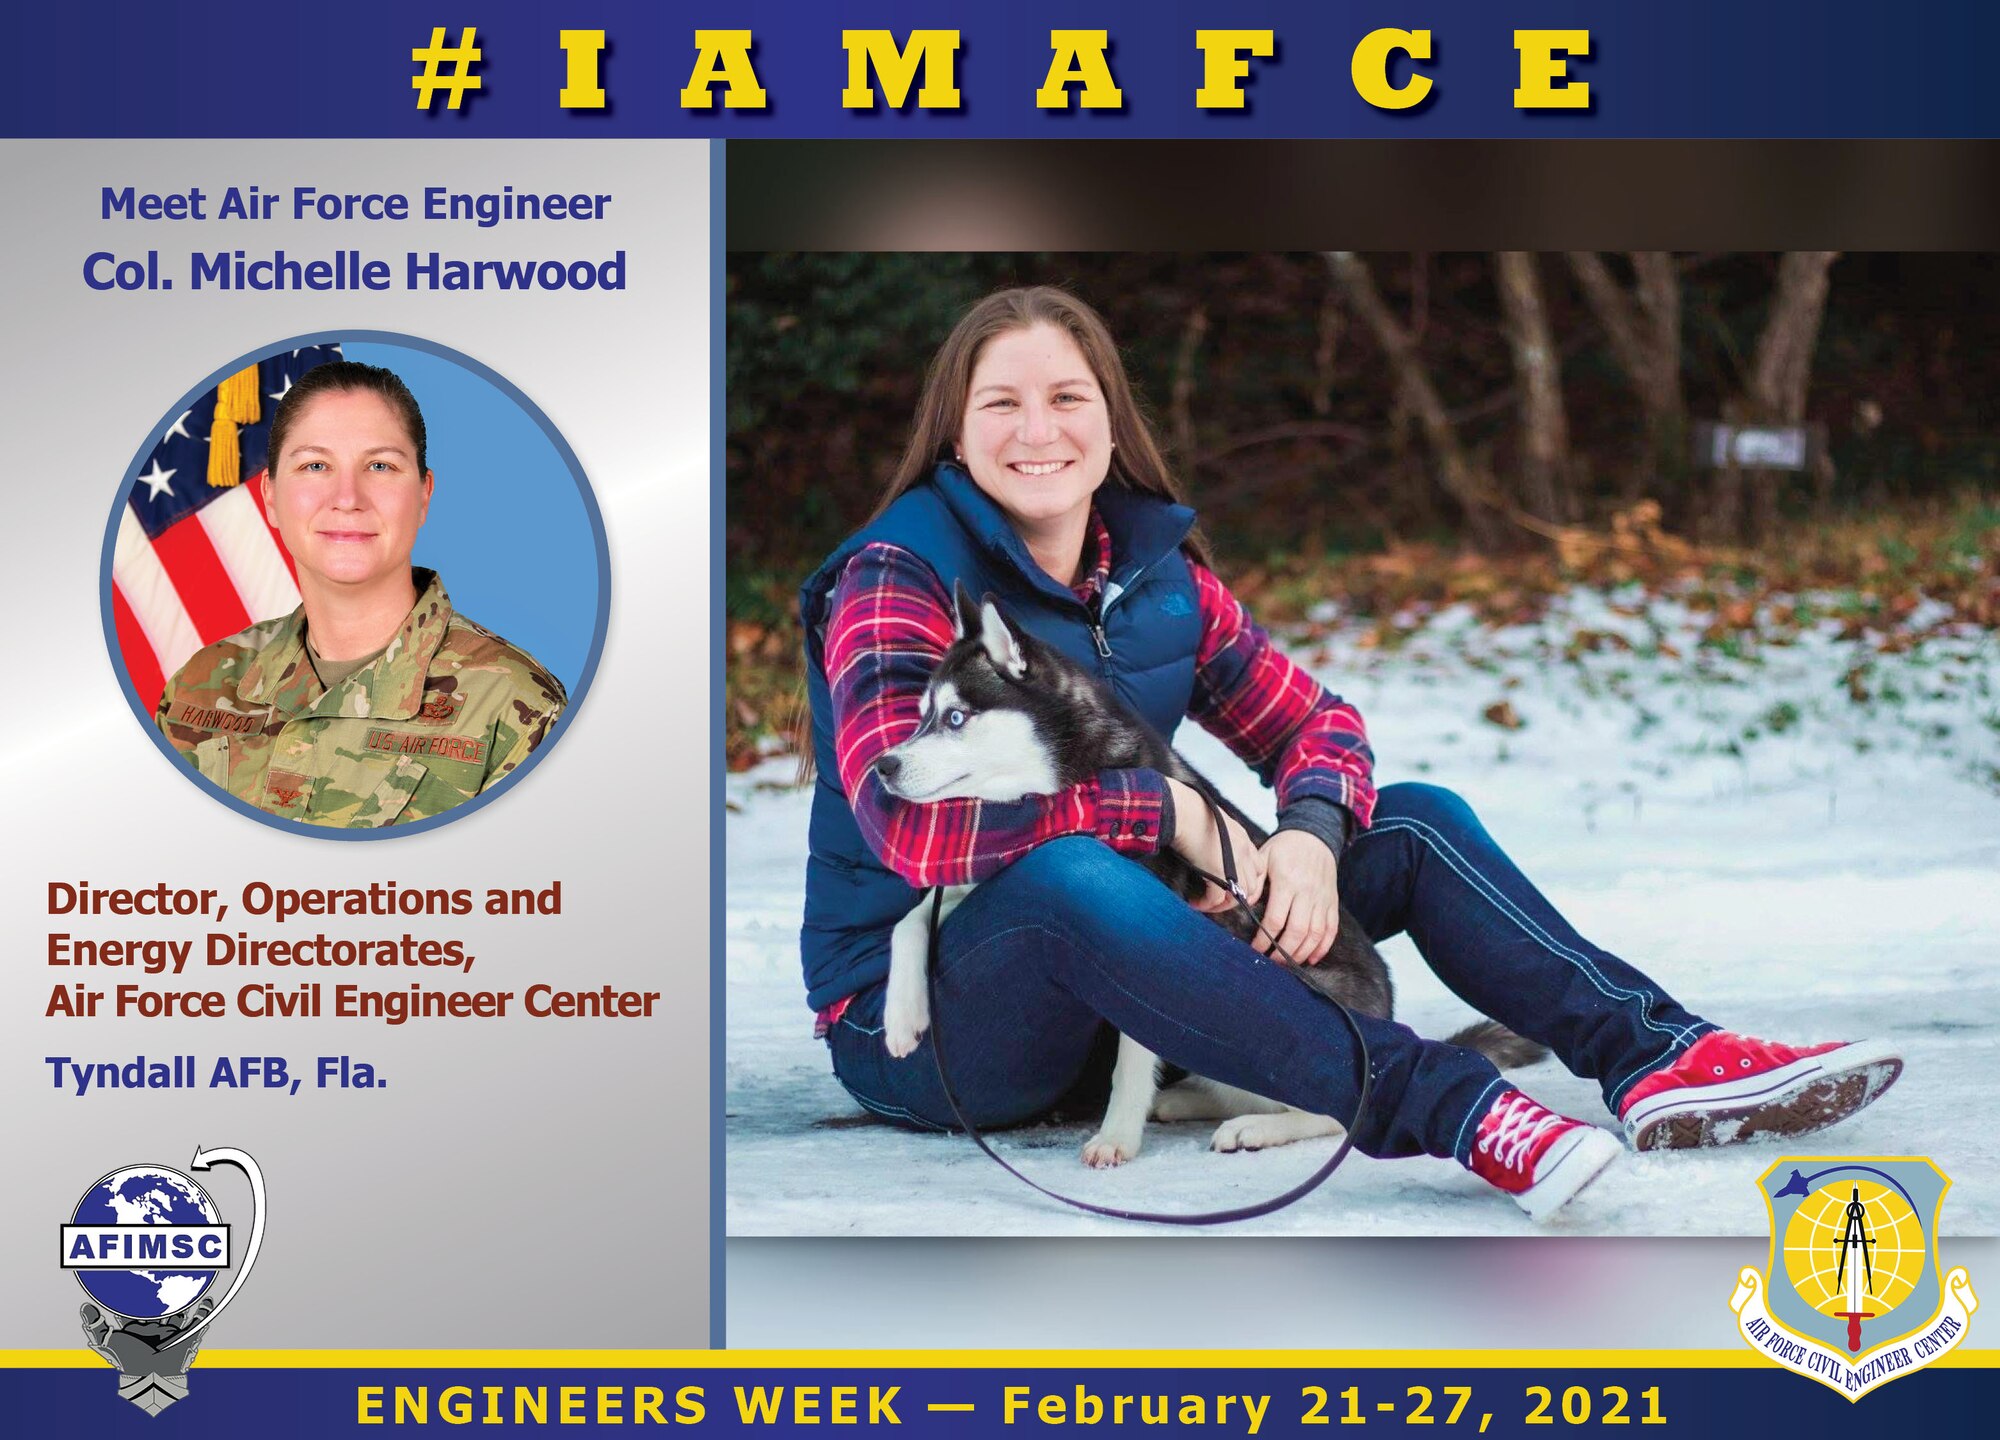 Air Force civil engineer Col. Michelle Harwood